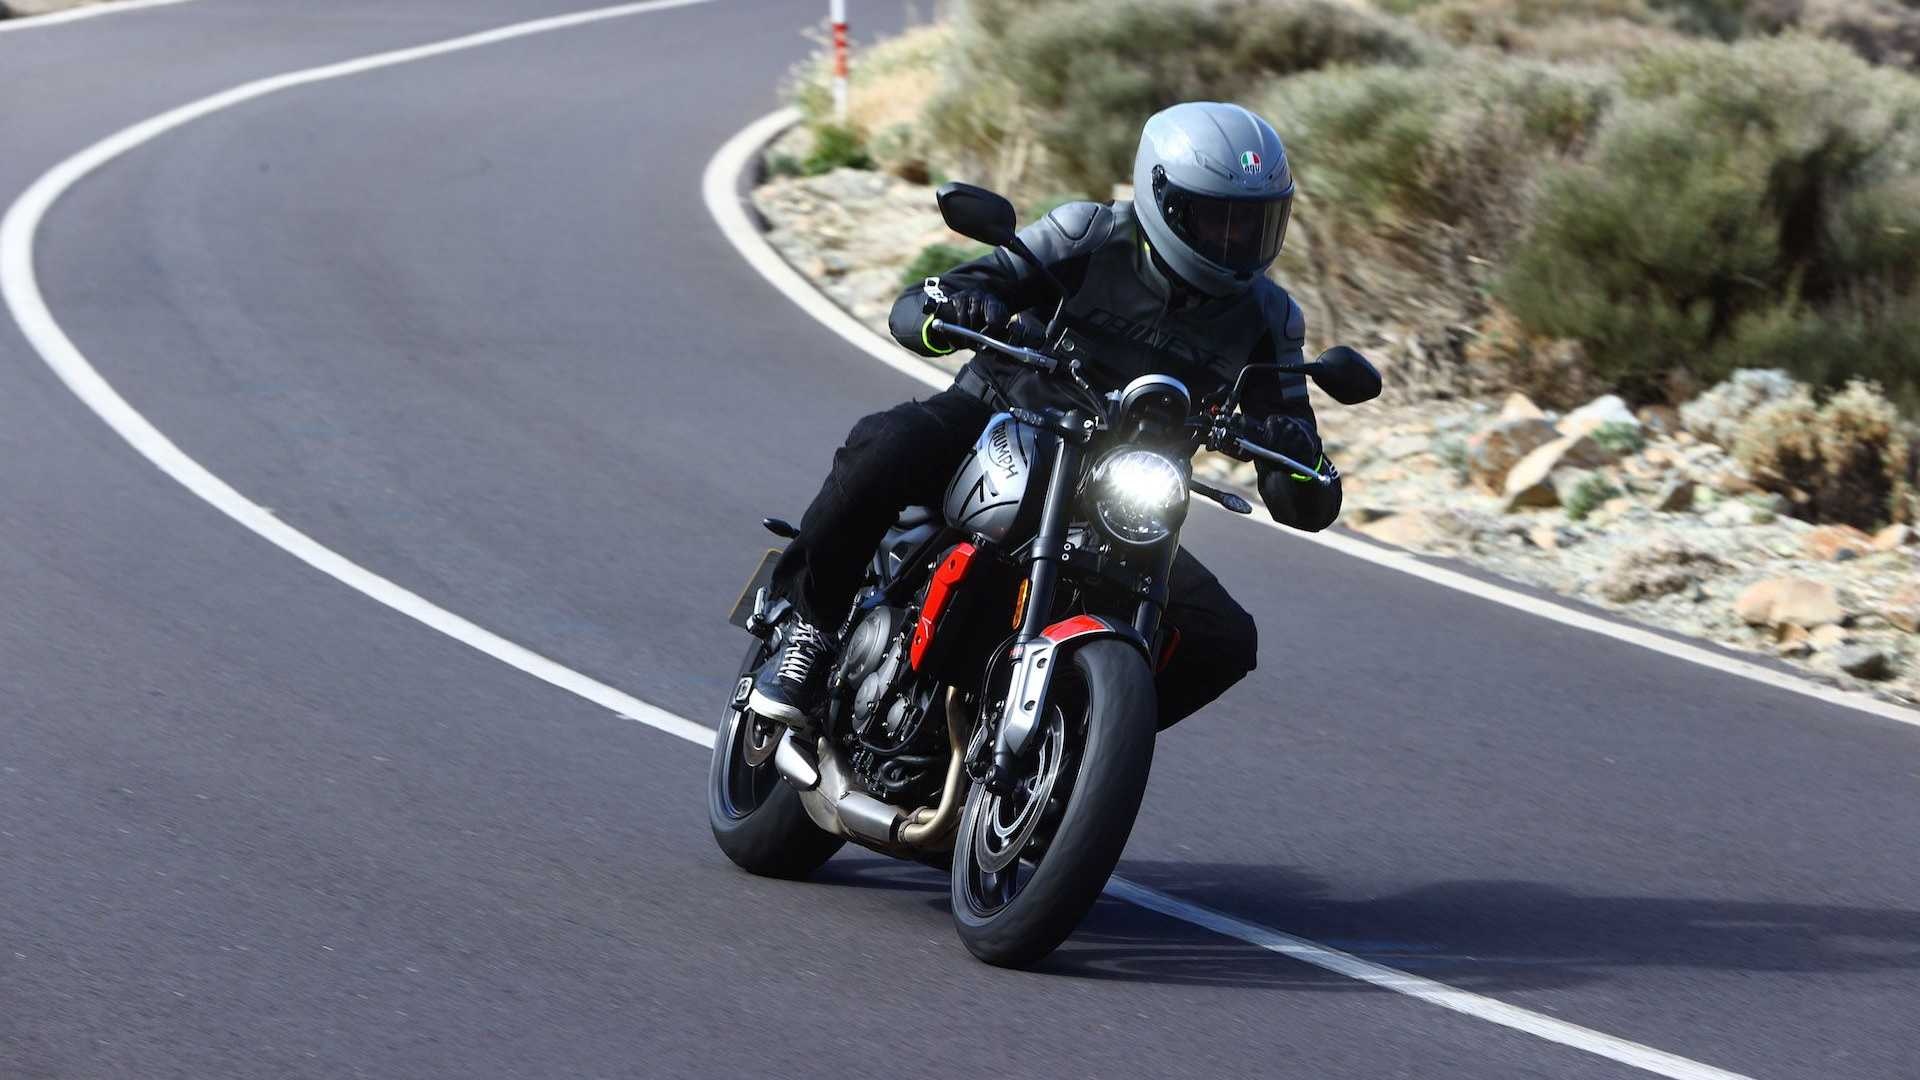 Triumph Trident 660, Introducing the 2021 model, First ride impressions, Perfect roadster, 1920x1080 Full HD Desktop